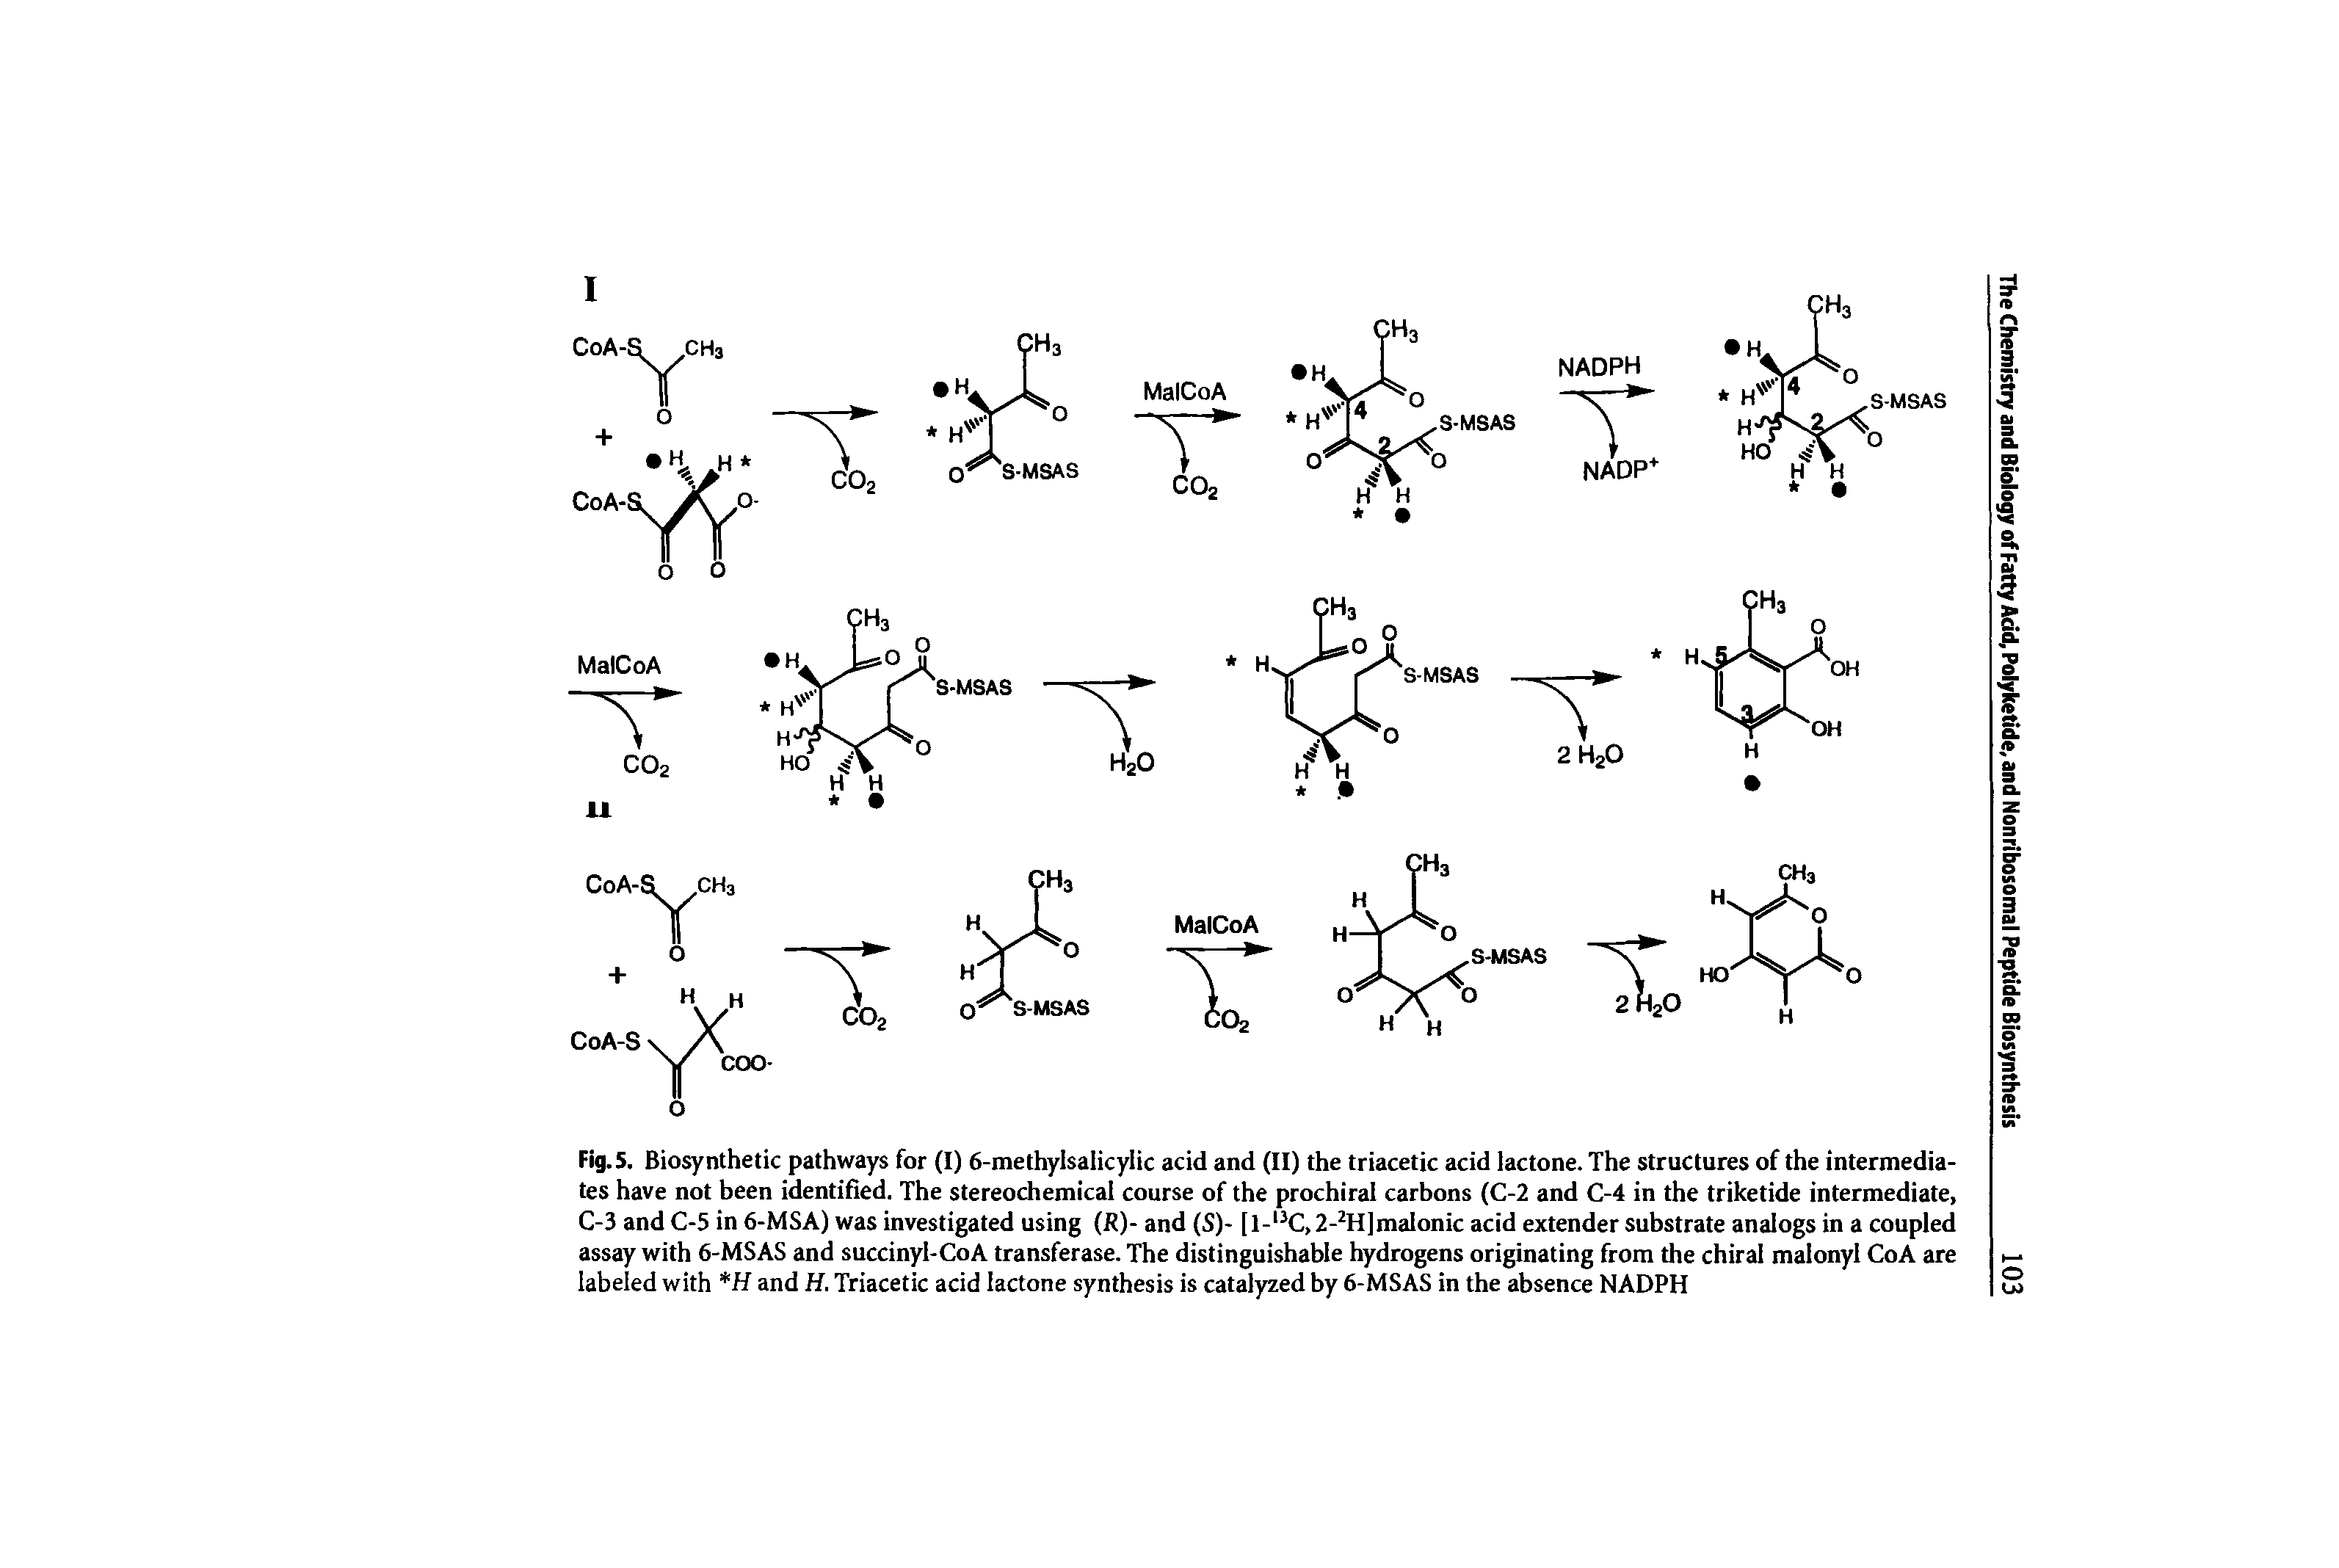 Fig. 5. Biosynthetic pathways for (I) 6-methylsalicylic acid and (II) the triacetic acid lactone. The structures of the intermediates have not been identified. The stereochemical course of the prochiral carbons (C-2 and C-4 in the triketide intermediate, C-3 and C-5 in 6-MSA) was investigated using R)- and (S)- [l- C,2- H]malonic acid extender substrate analogs in a coupled assay with 6-MSAS and succinyl-CoA transferase. The distinguishable hydrogens originating from the chiral malonyl CoA are labeled with H and H. Triacetic acid lactone synthesis is catalyzed by 6-MSAS in the absence NADPH...